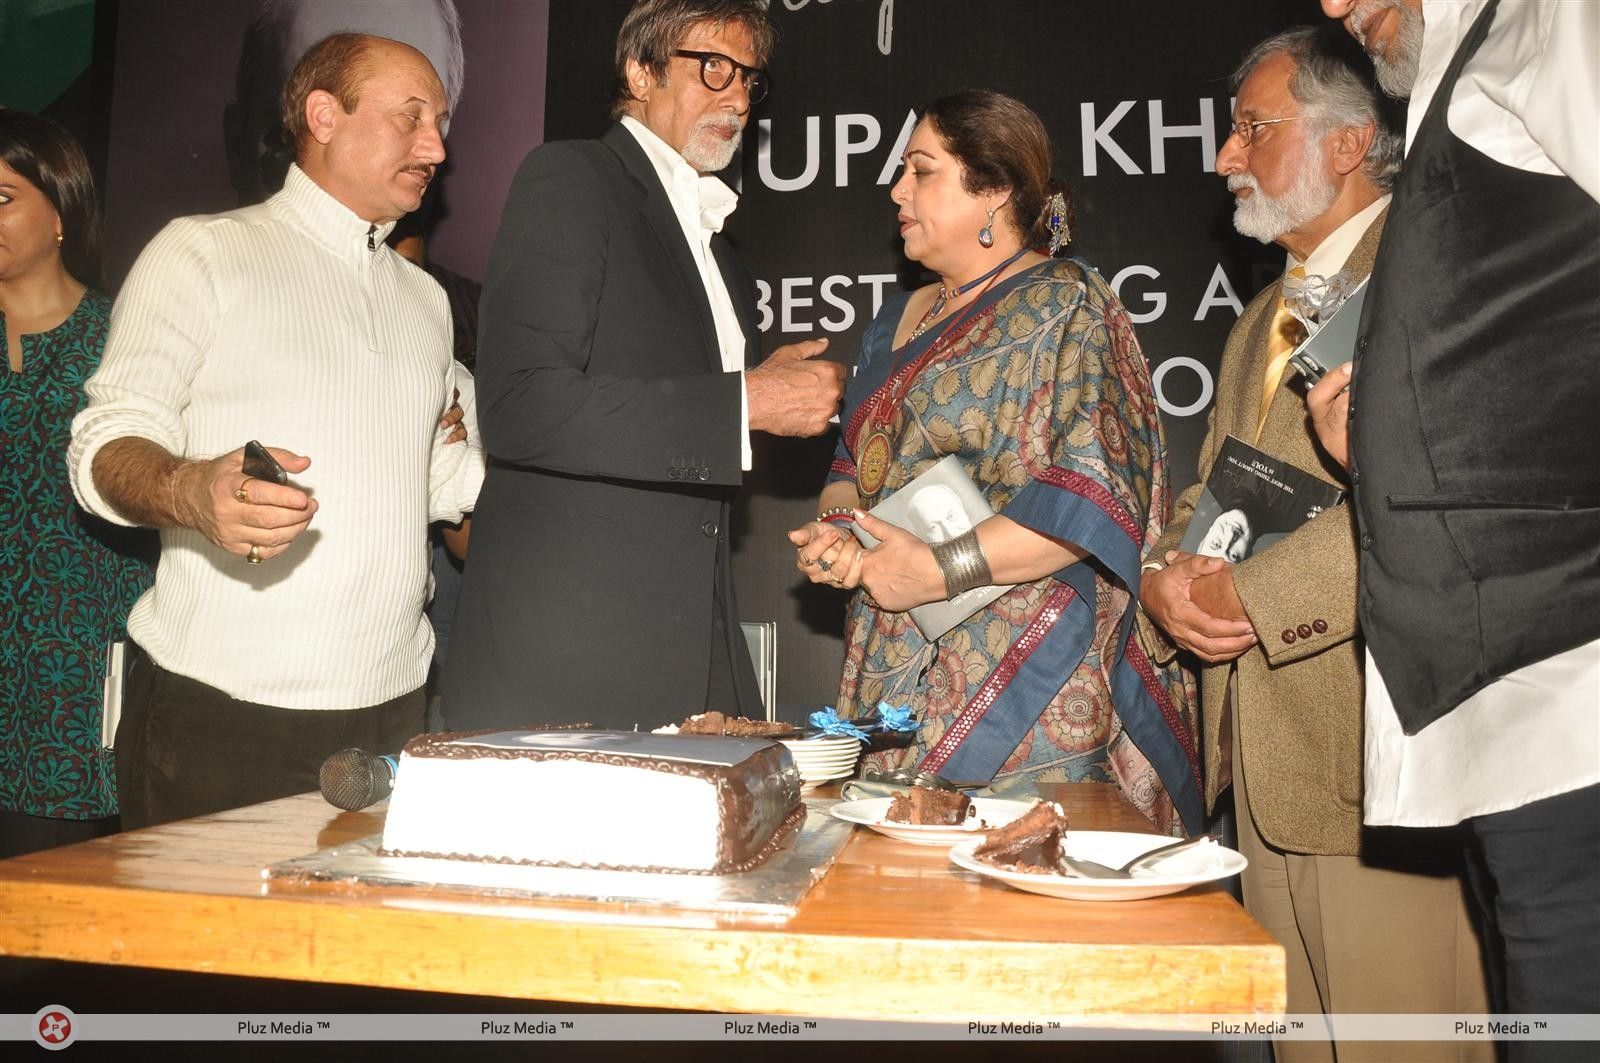 Photos - Amitabh Bachchan launches Anupam Kher's book | Picture 145150